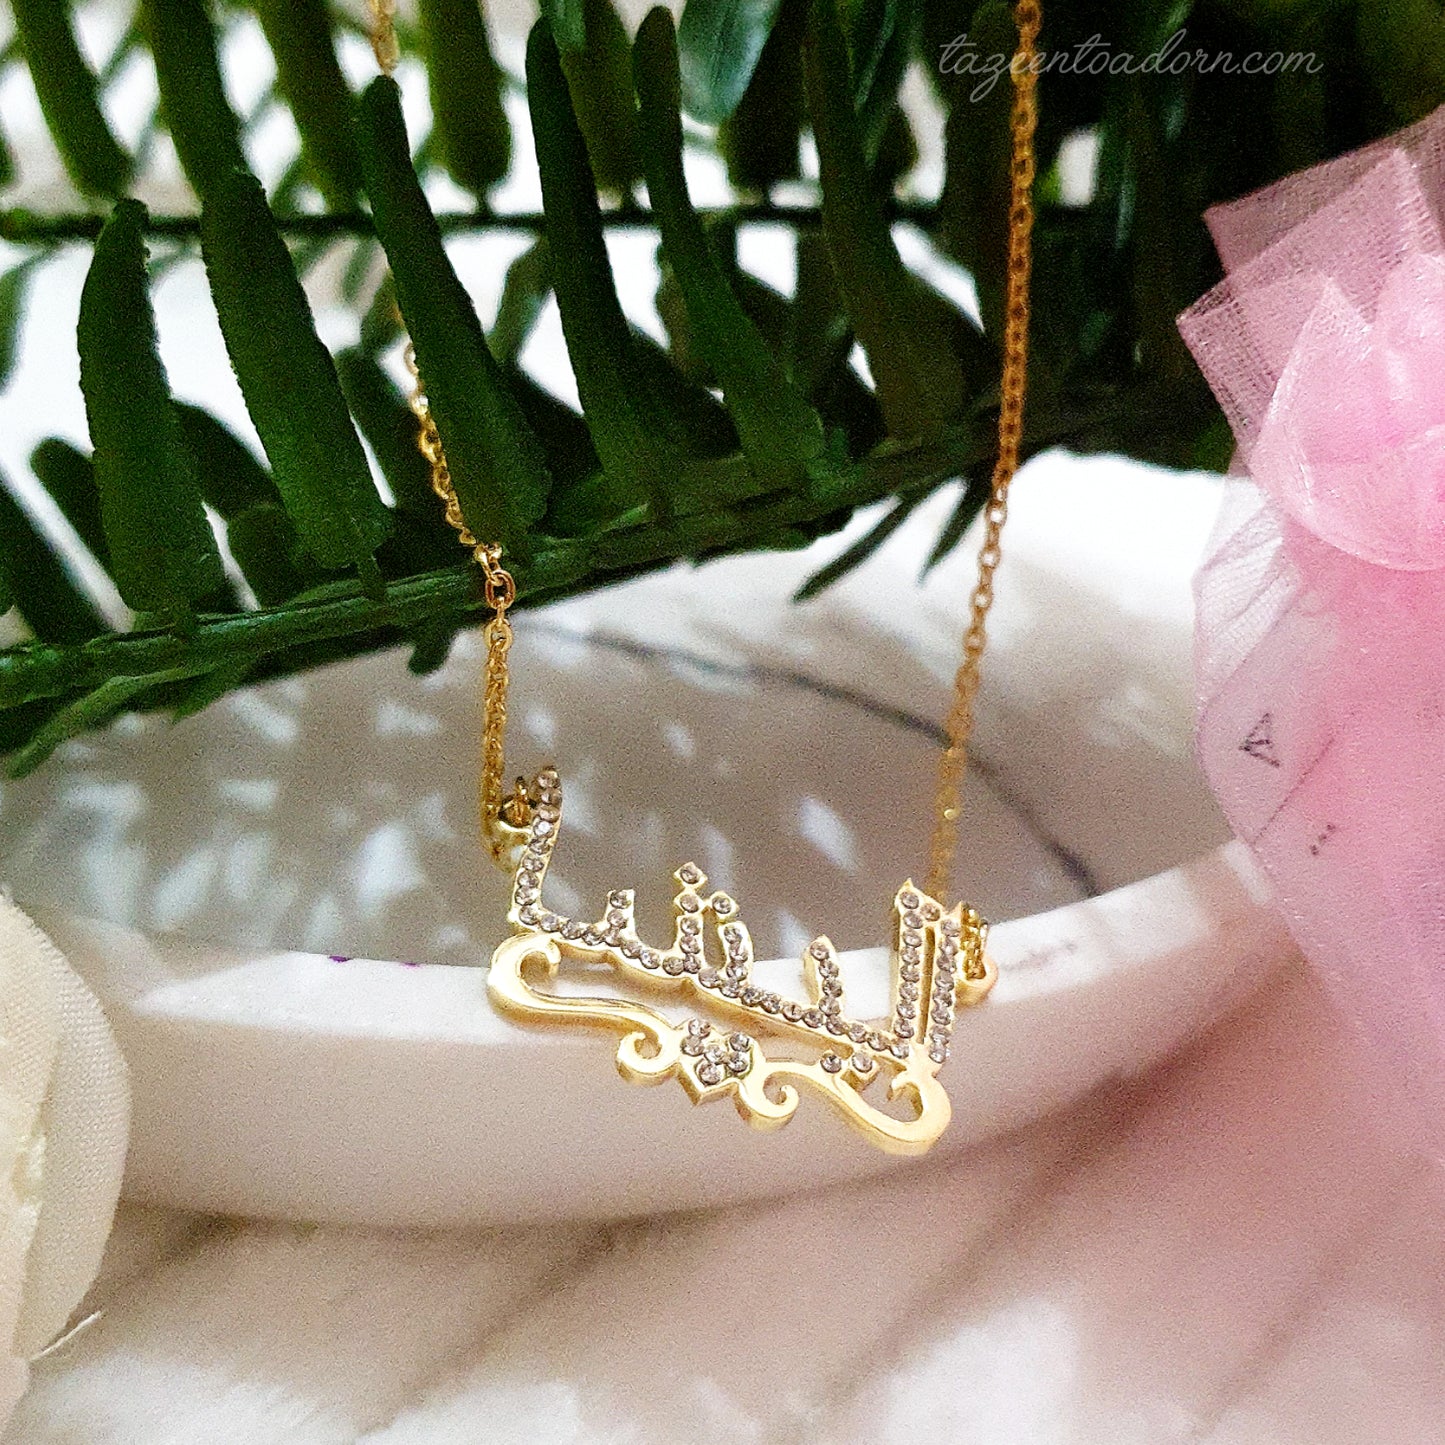 Personalised Custom Girls Diamante Name with Ribbon & Heart Necklace -  Arabic English Jewellery Kid, Toddler Gifts - Baby to 14years - AISHA